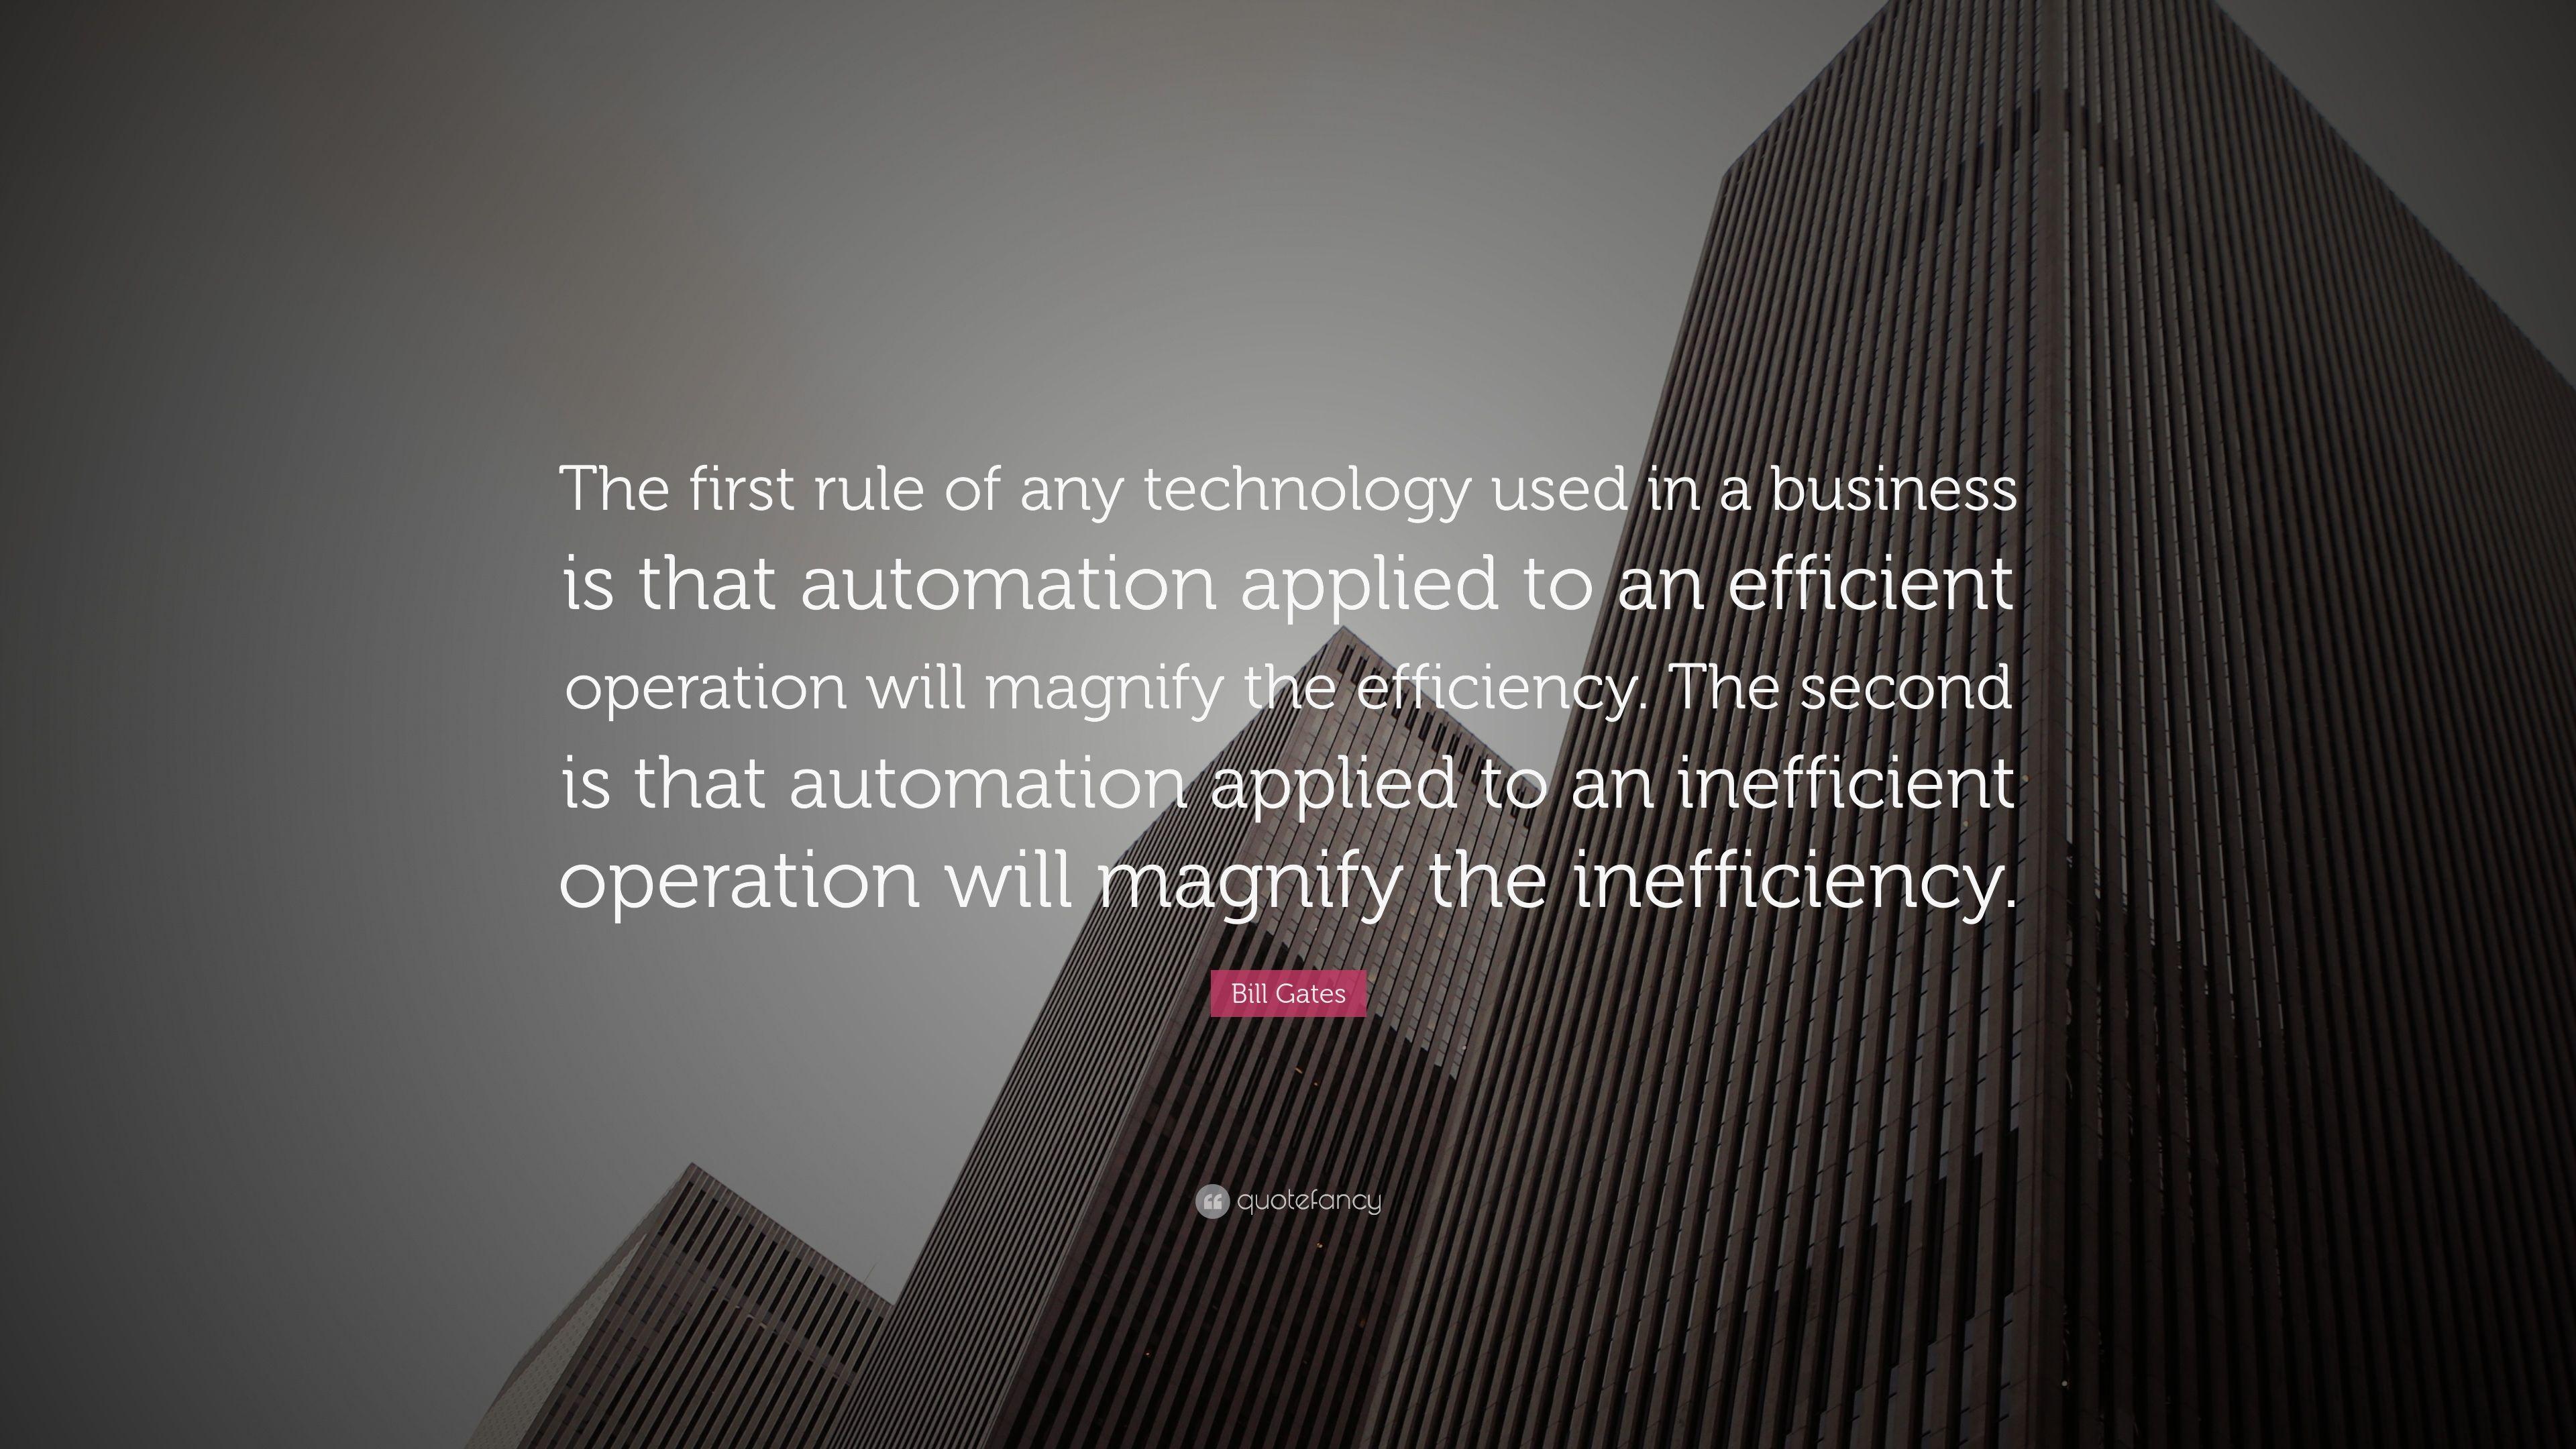 Bill Gates Quote: “The first rule of any technology used in a